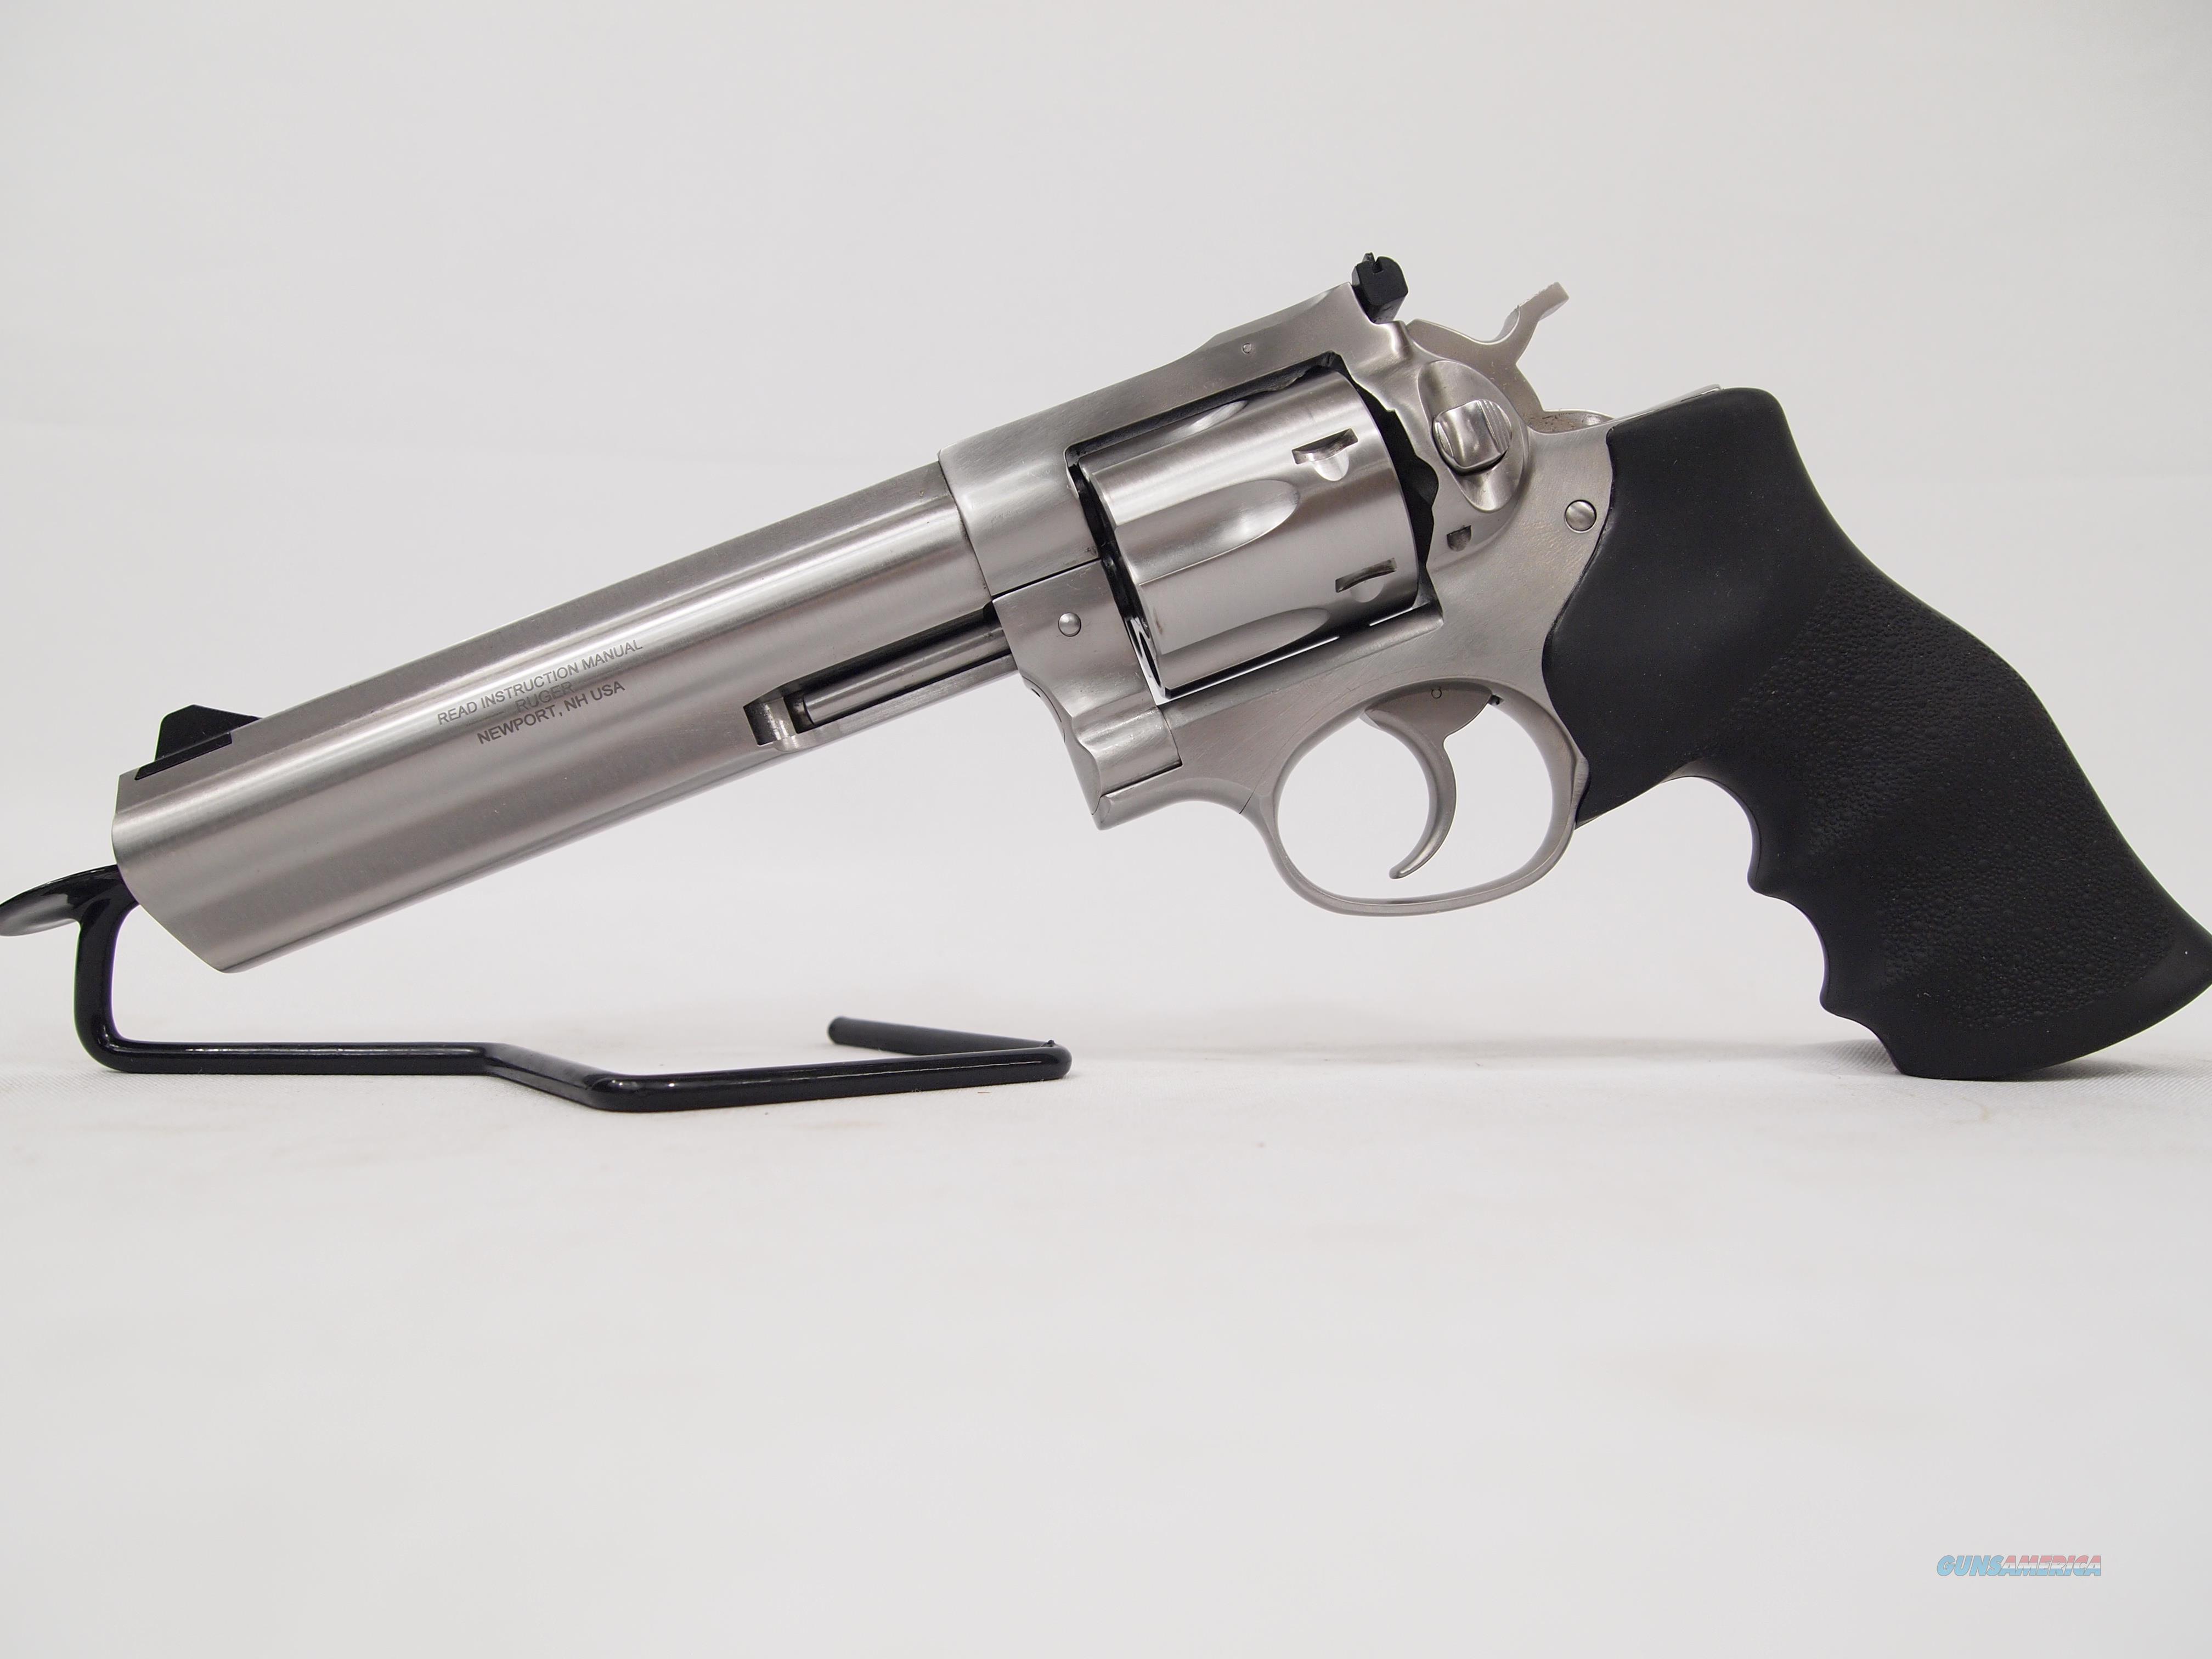 Ruger Gp100 Double Action Revolver 357 Magnum 42 7514